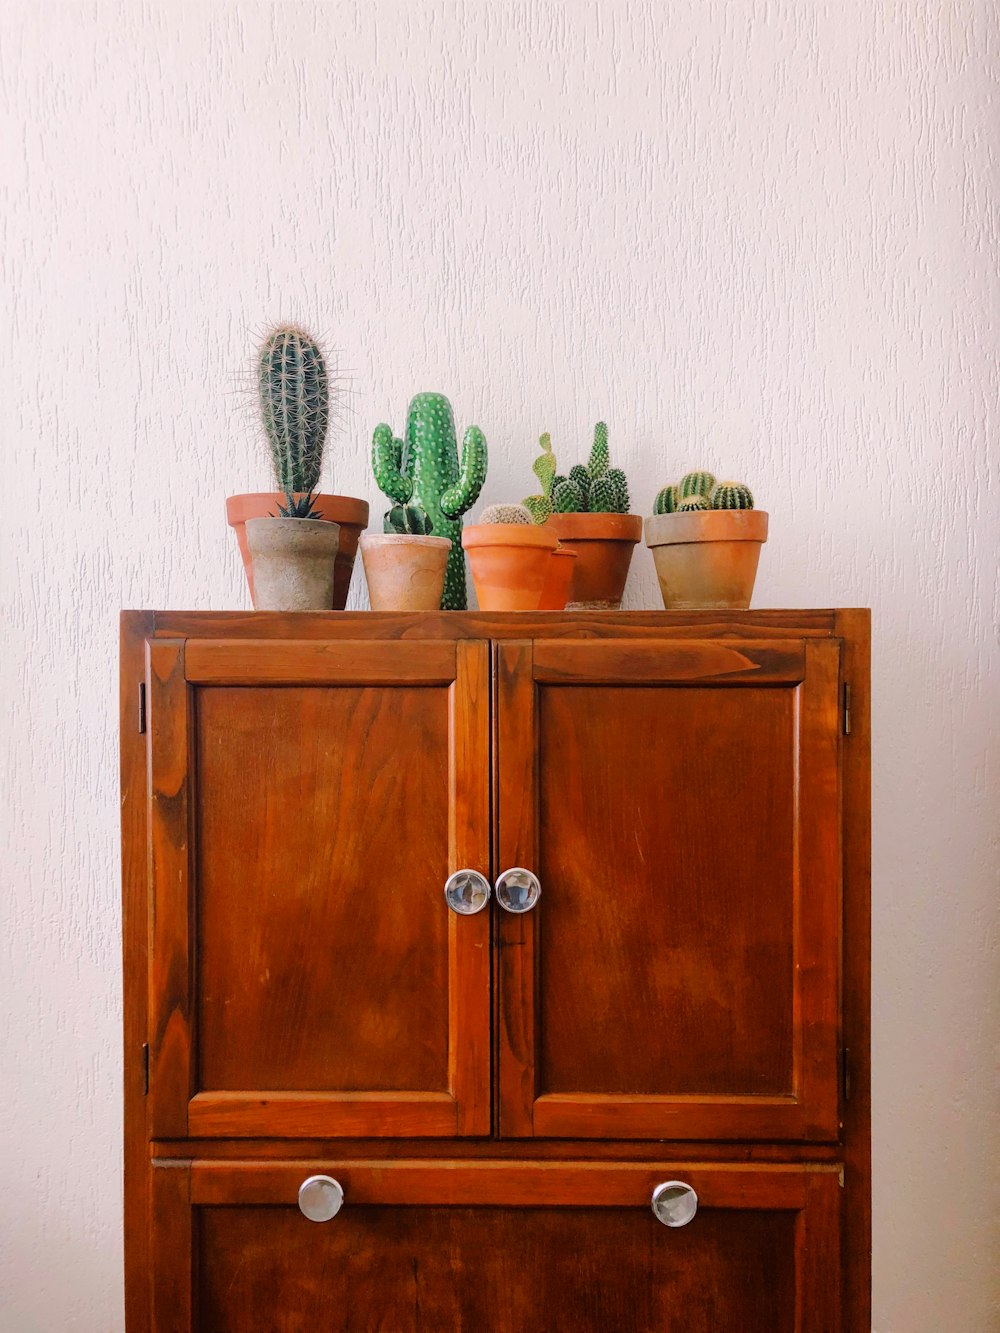 green cactus plant on brown wooden cabinet